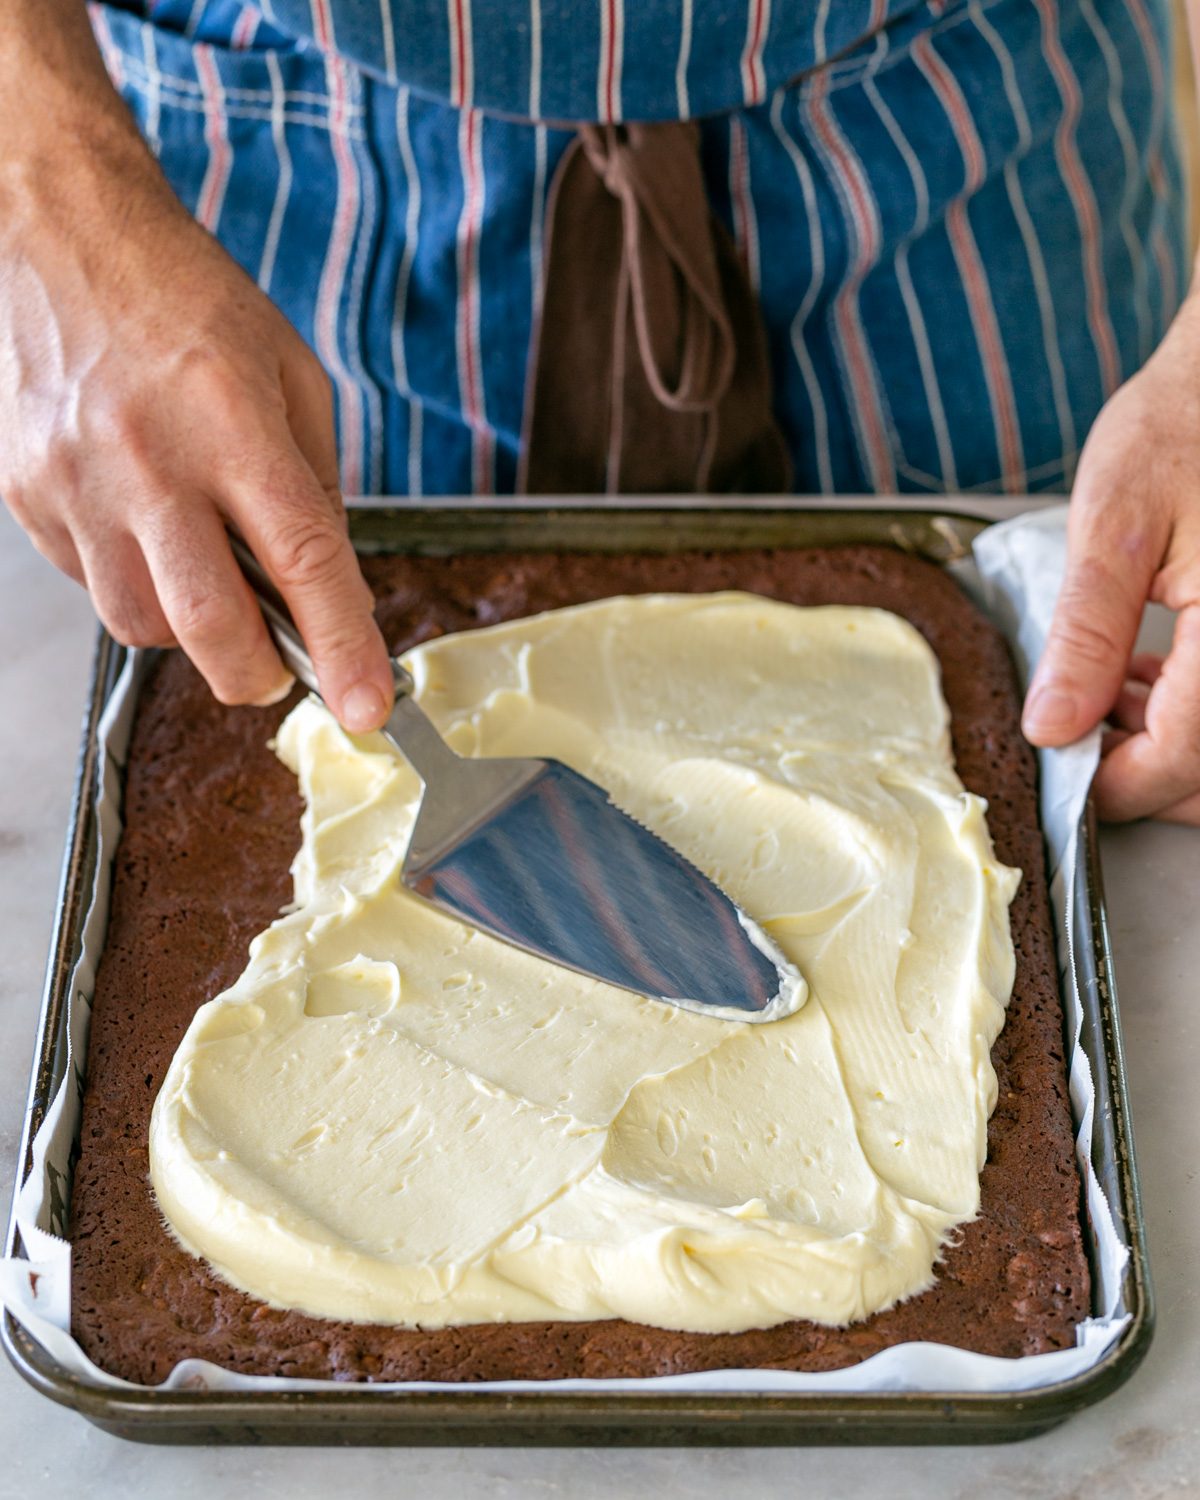 Cream cheese layer spread over brownie layer